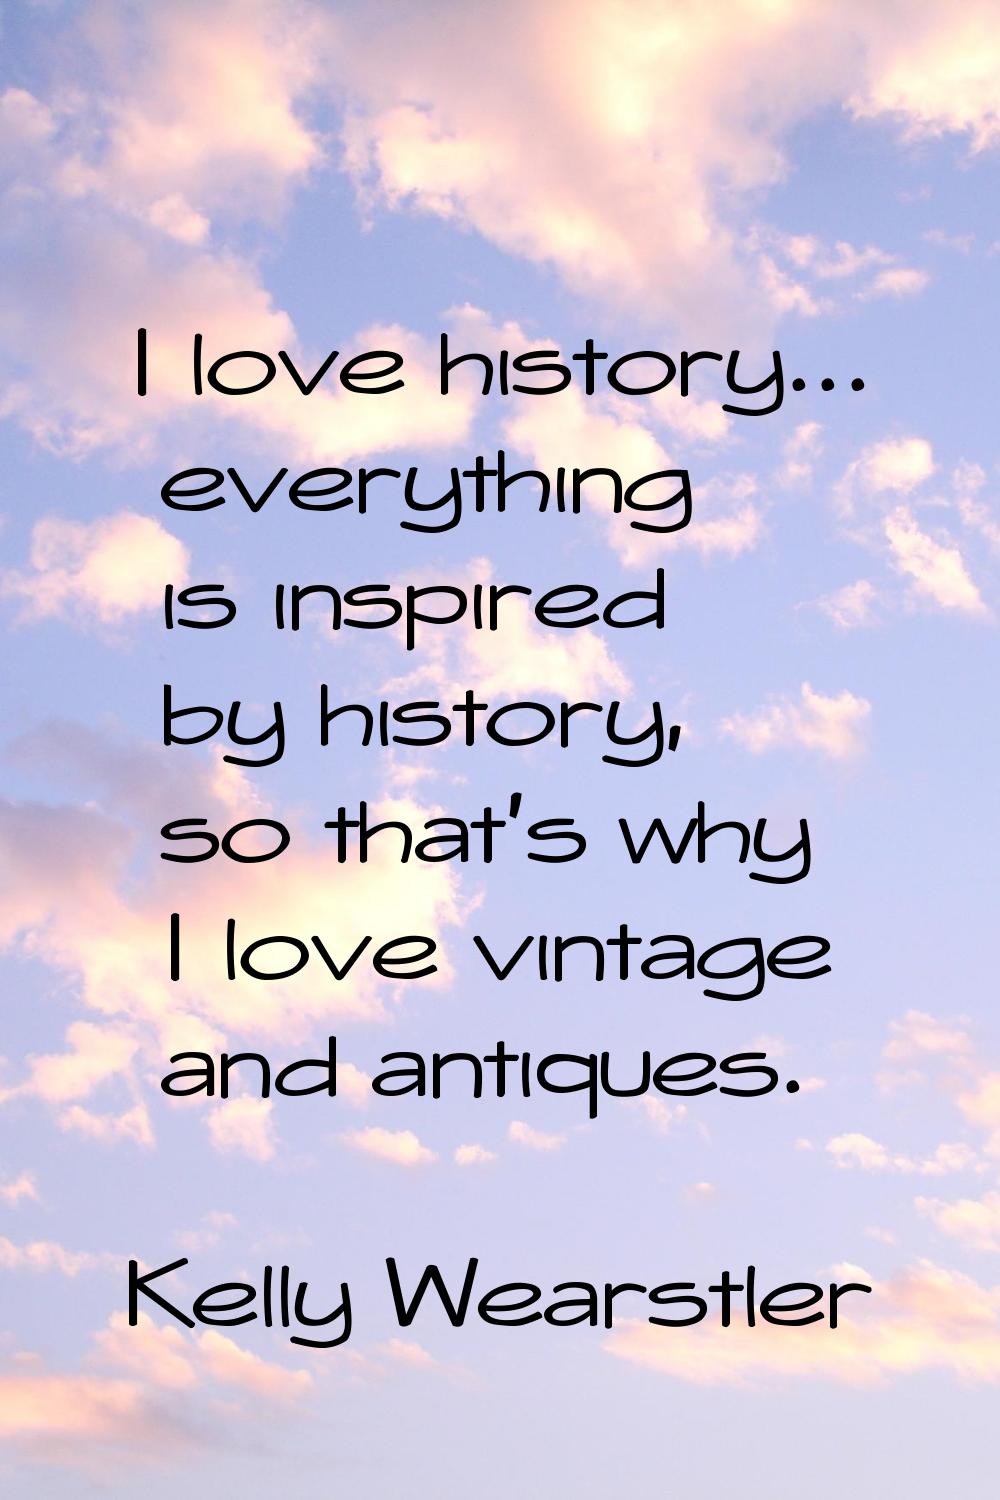 I love history... everything is inspired by history, so that's why I love vintage and antiques.